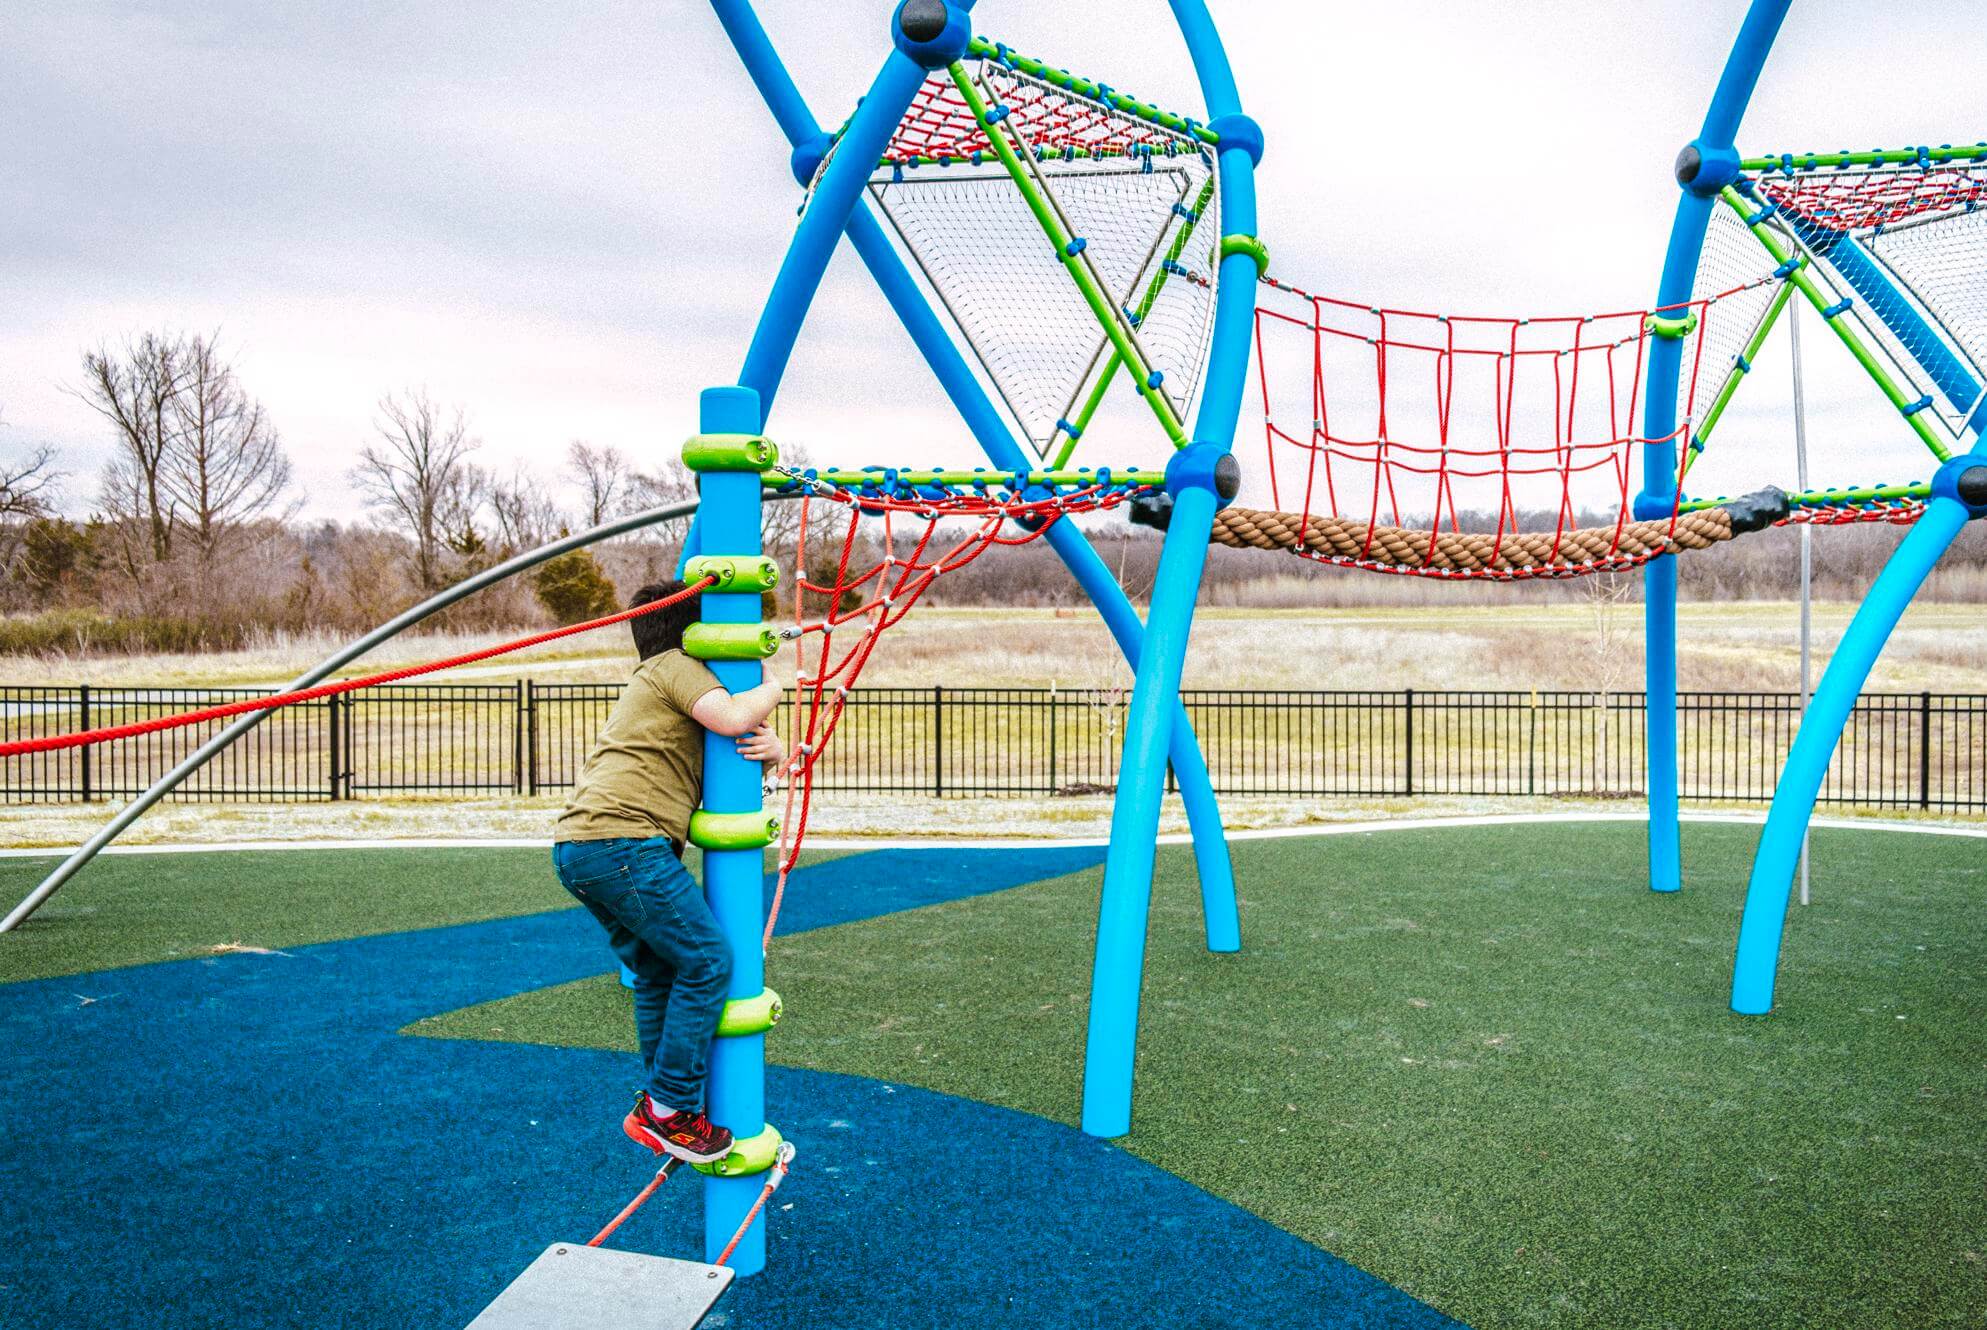 A child in a green shirt climbs a blue climbing frame with rope elements, on a playground with a mixture of blue and green synthetic grass.